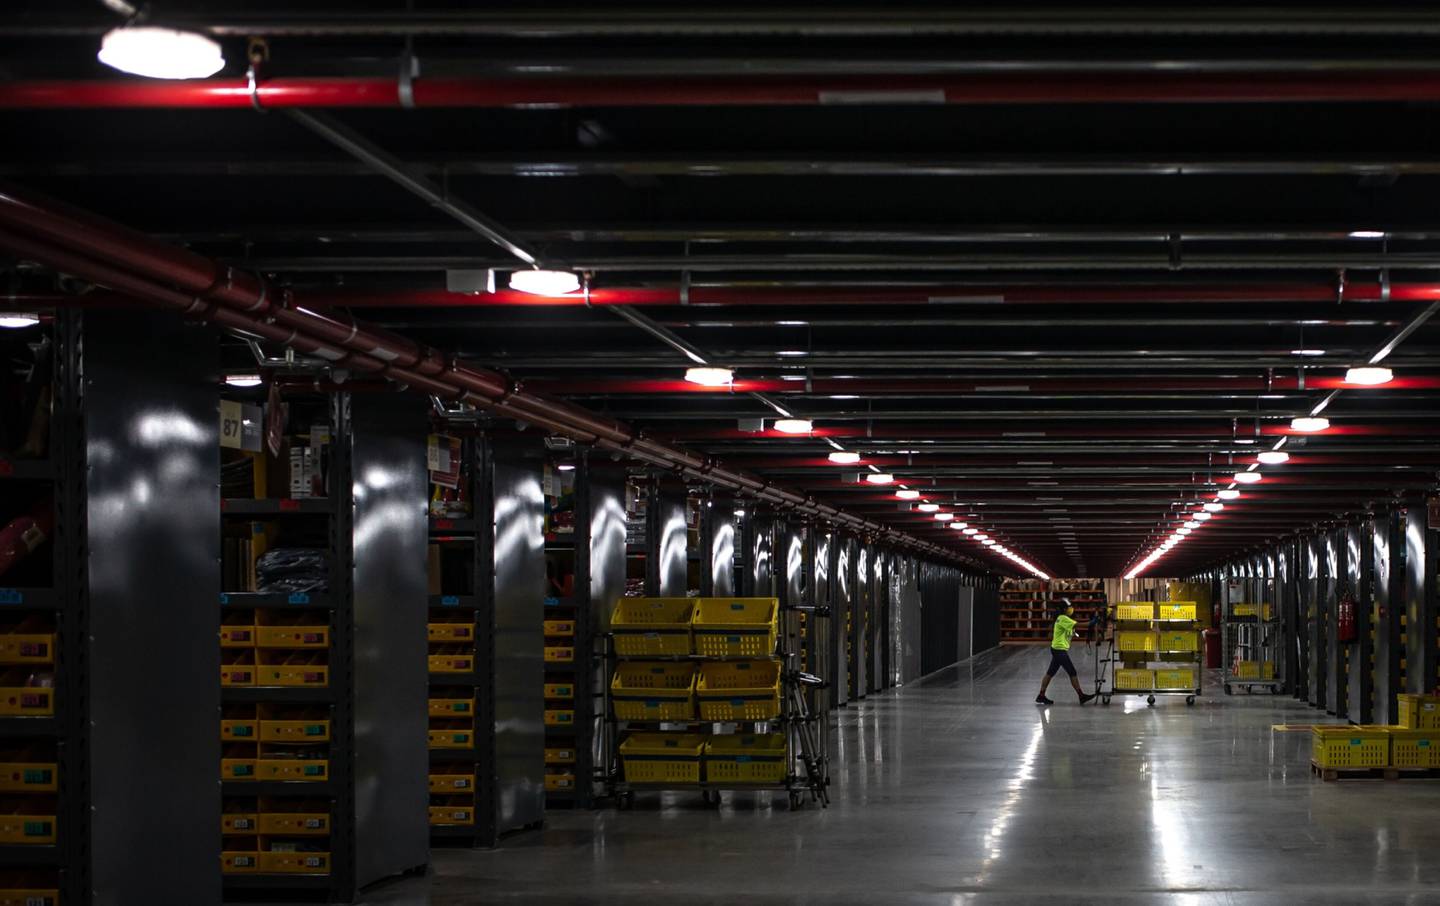 A worker pushes a cart at a MercadoLibre Inc. distribution and fulfillment center in Cajamar, Sao Paulo.